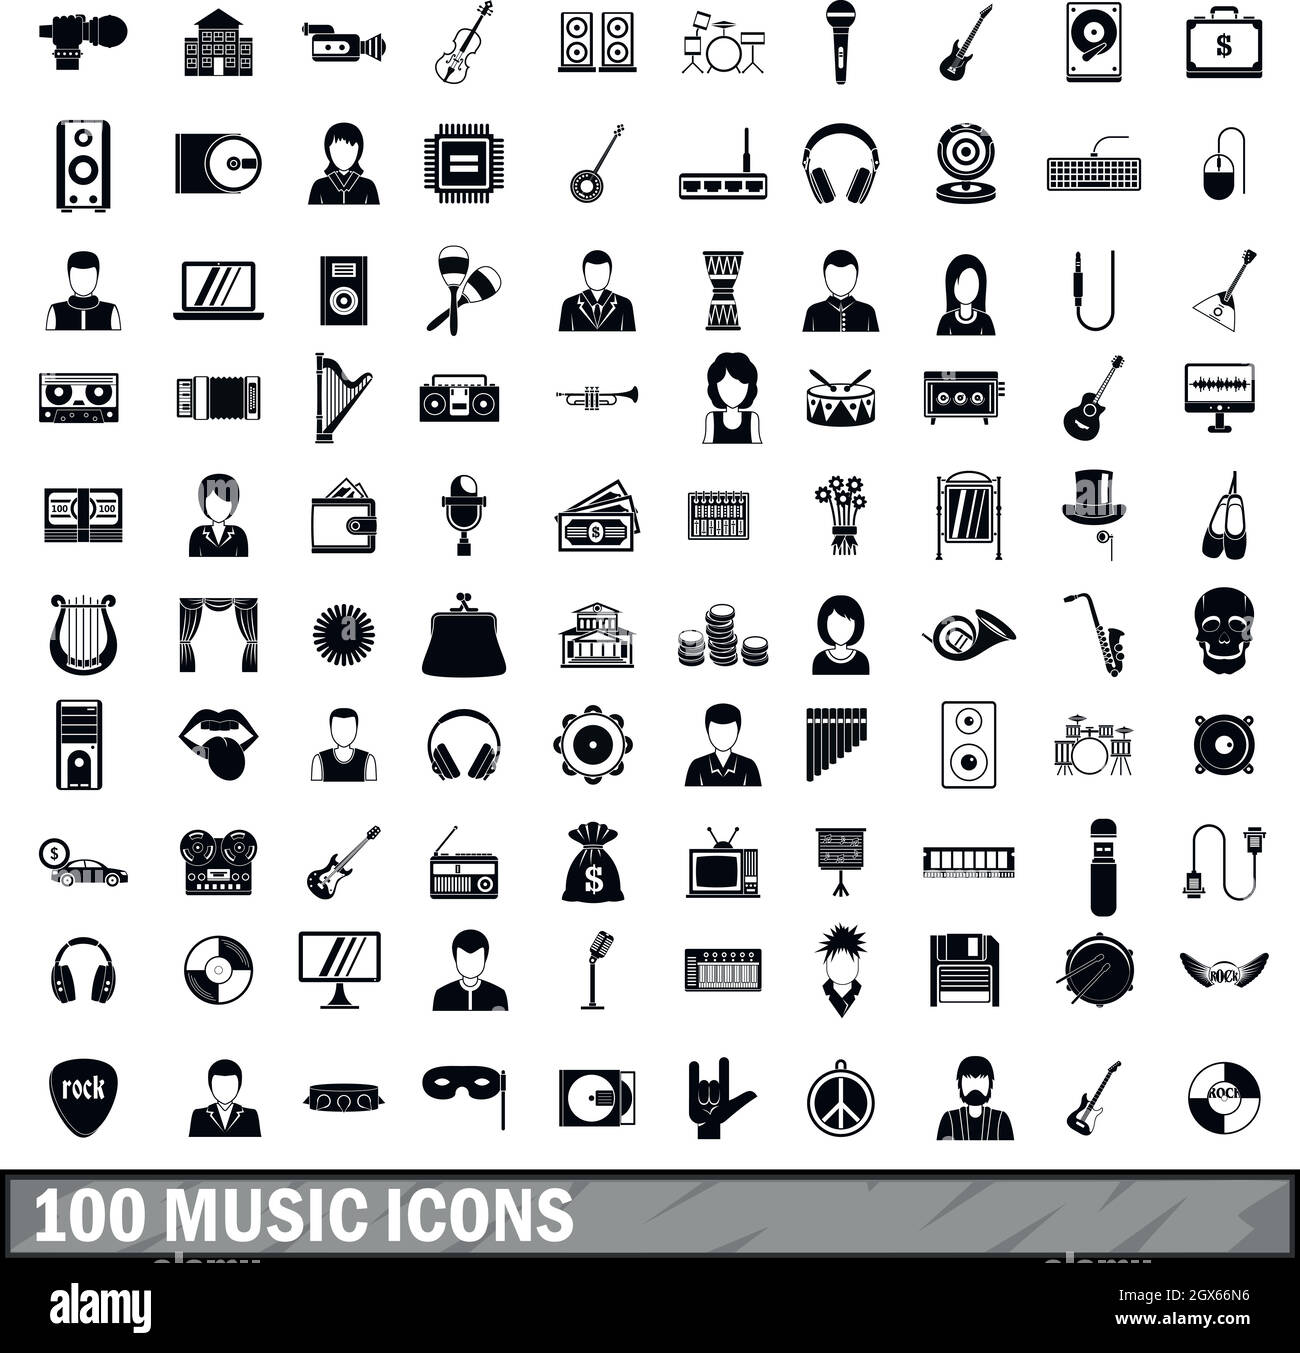 100 music icons set, simple style Stock Vector